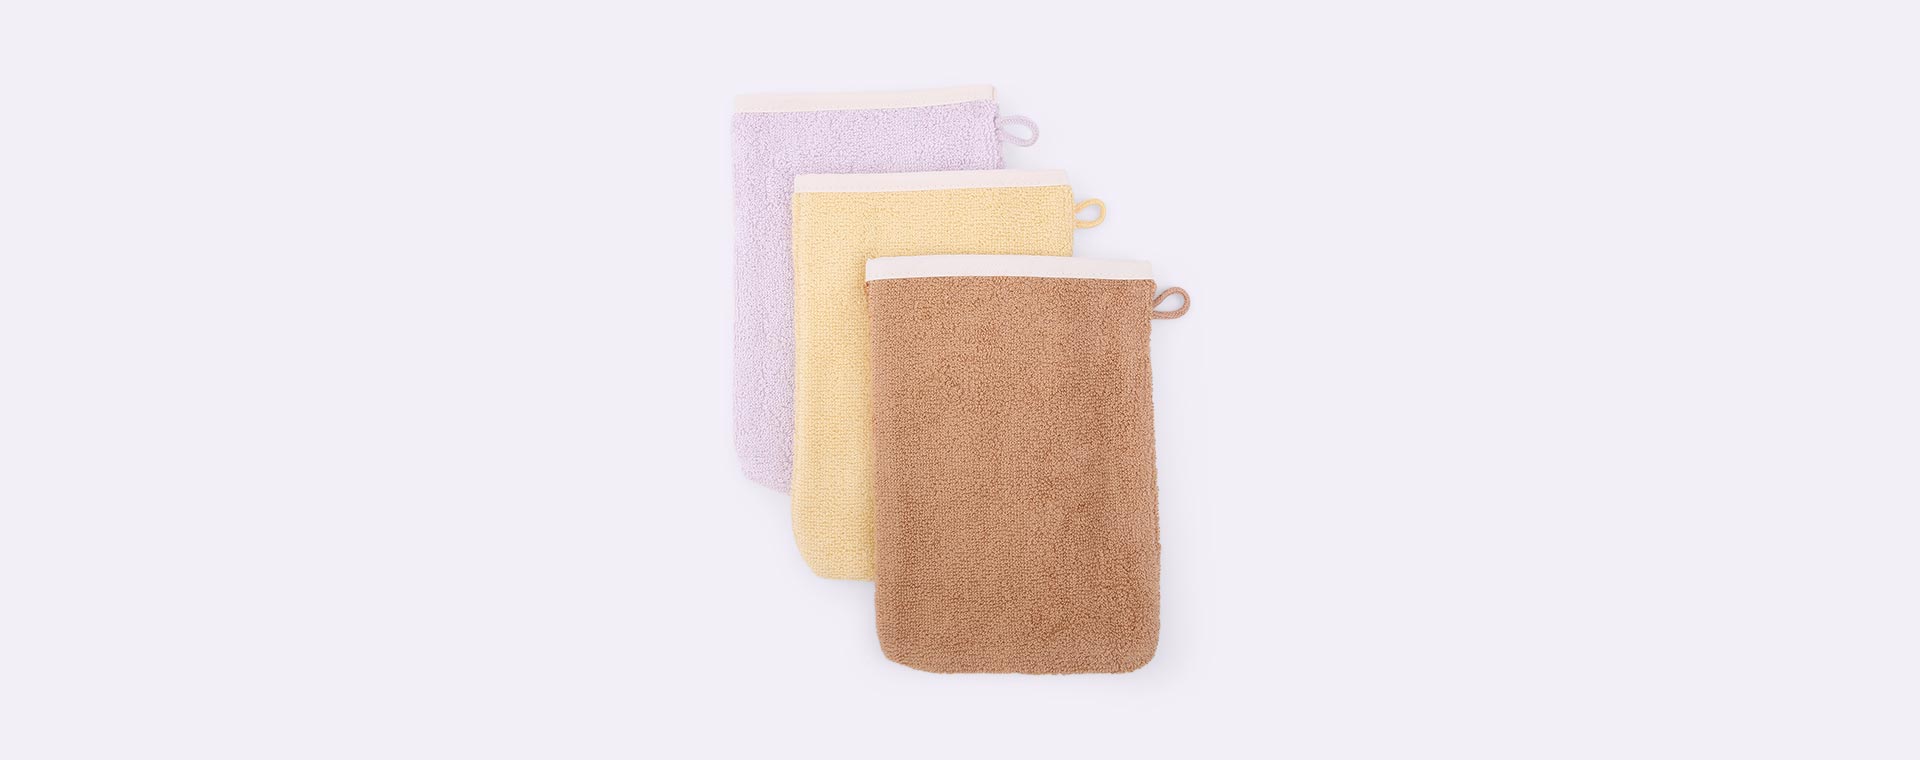 Buy the Fabelab 3-pack Bath Mitts at KIDLY UK